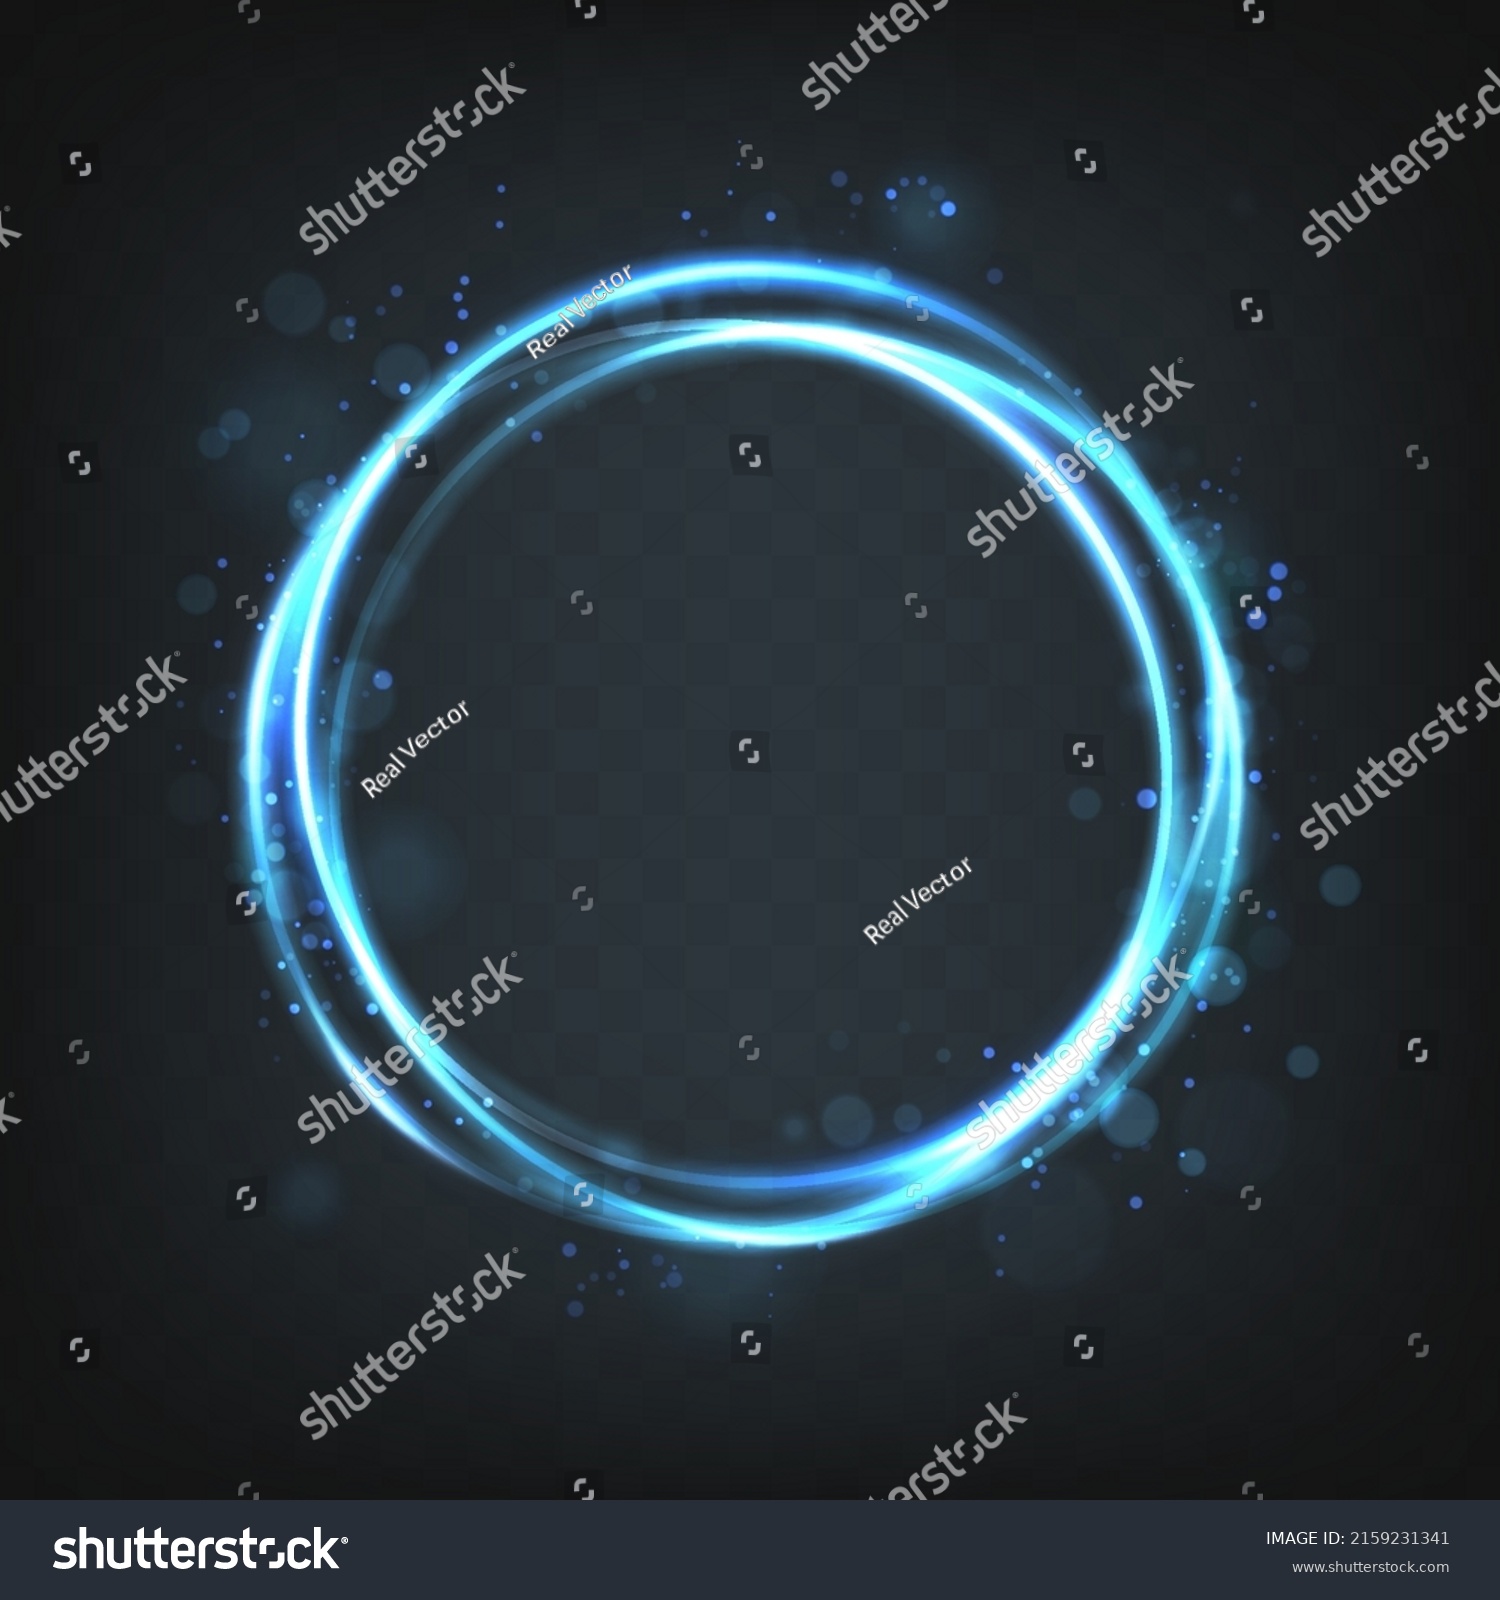 SVG of Vector illustration. Blue portal flair round circle with sparkles and glow in the dark. svg